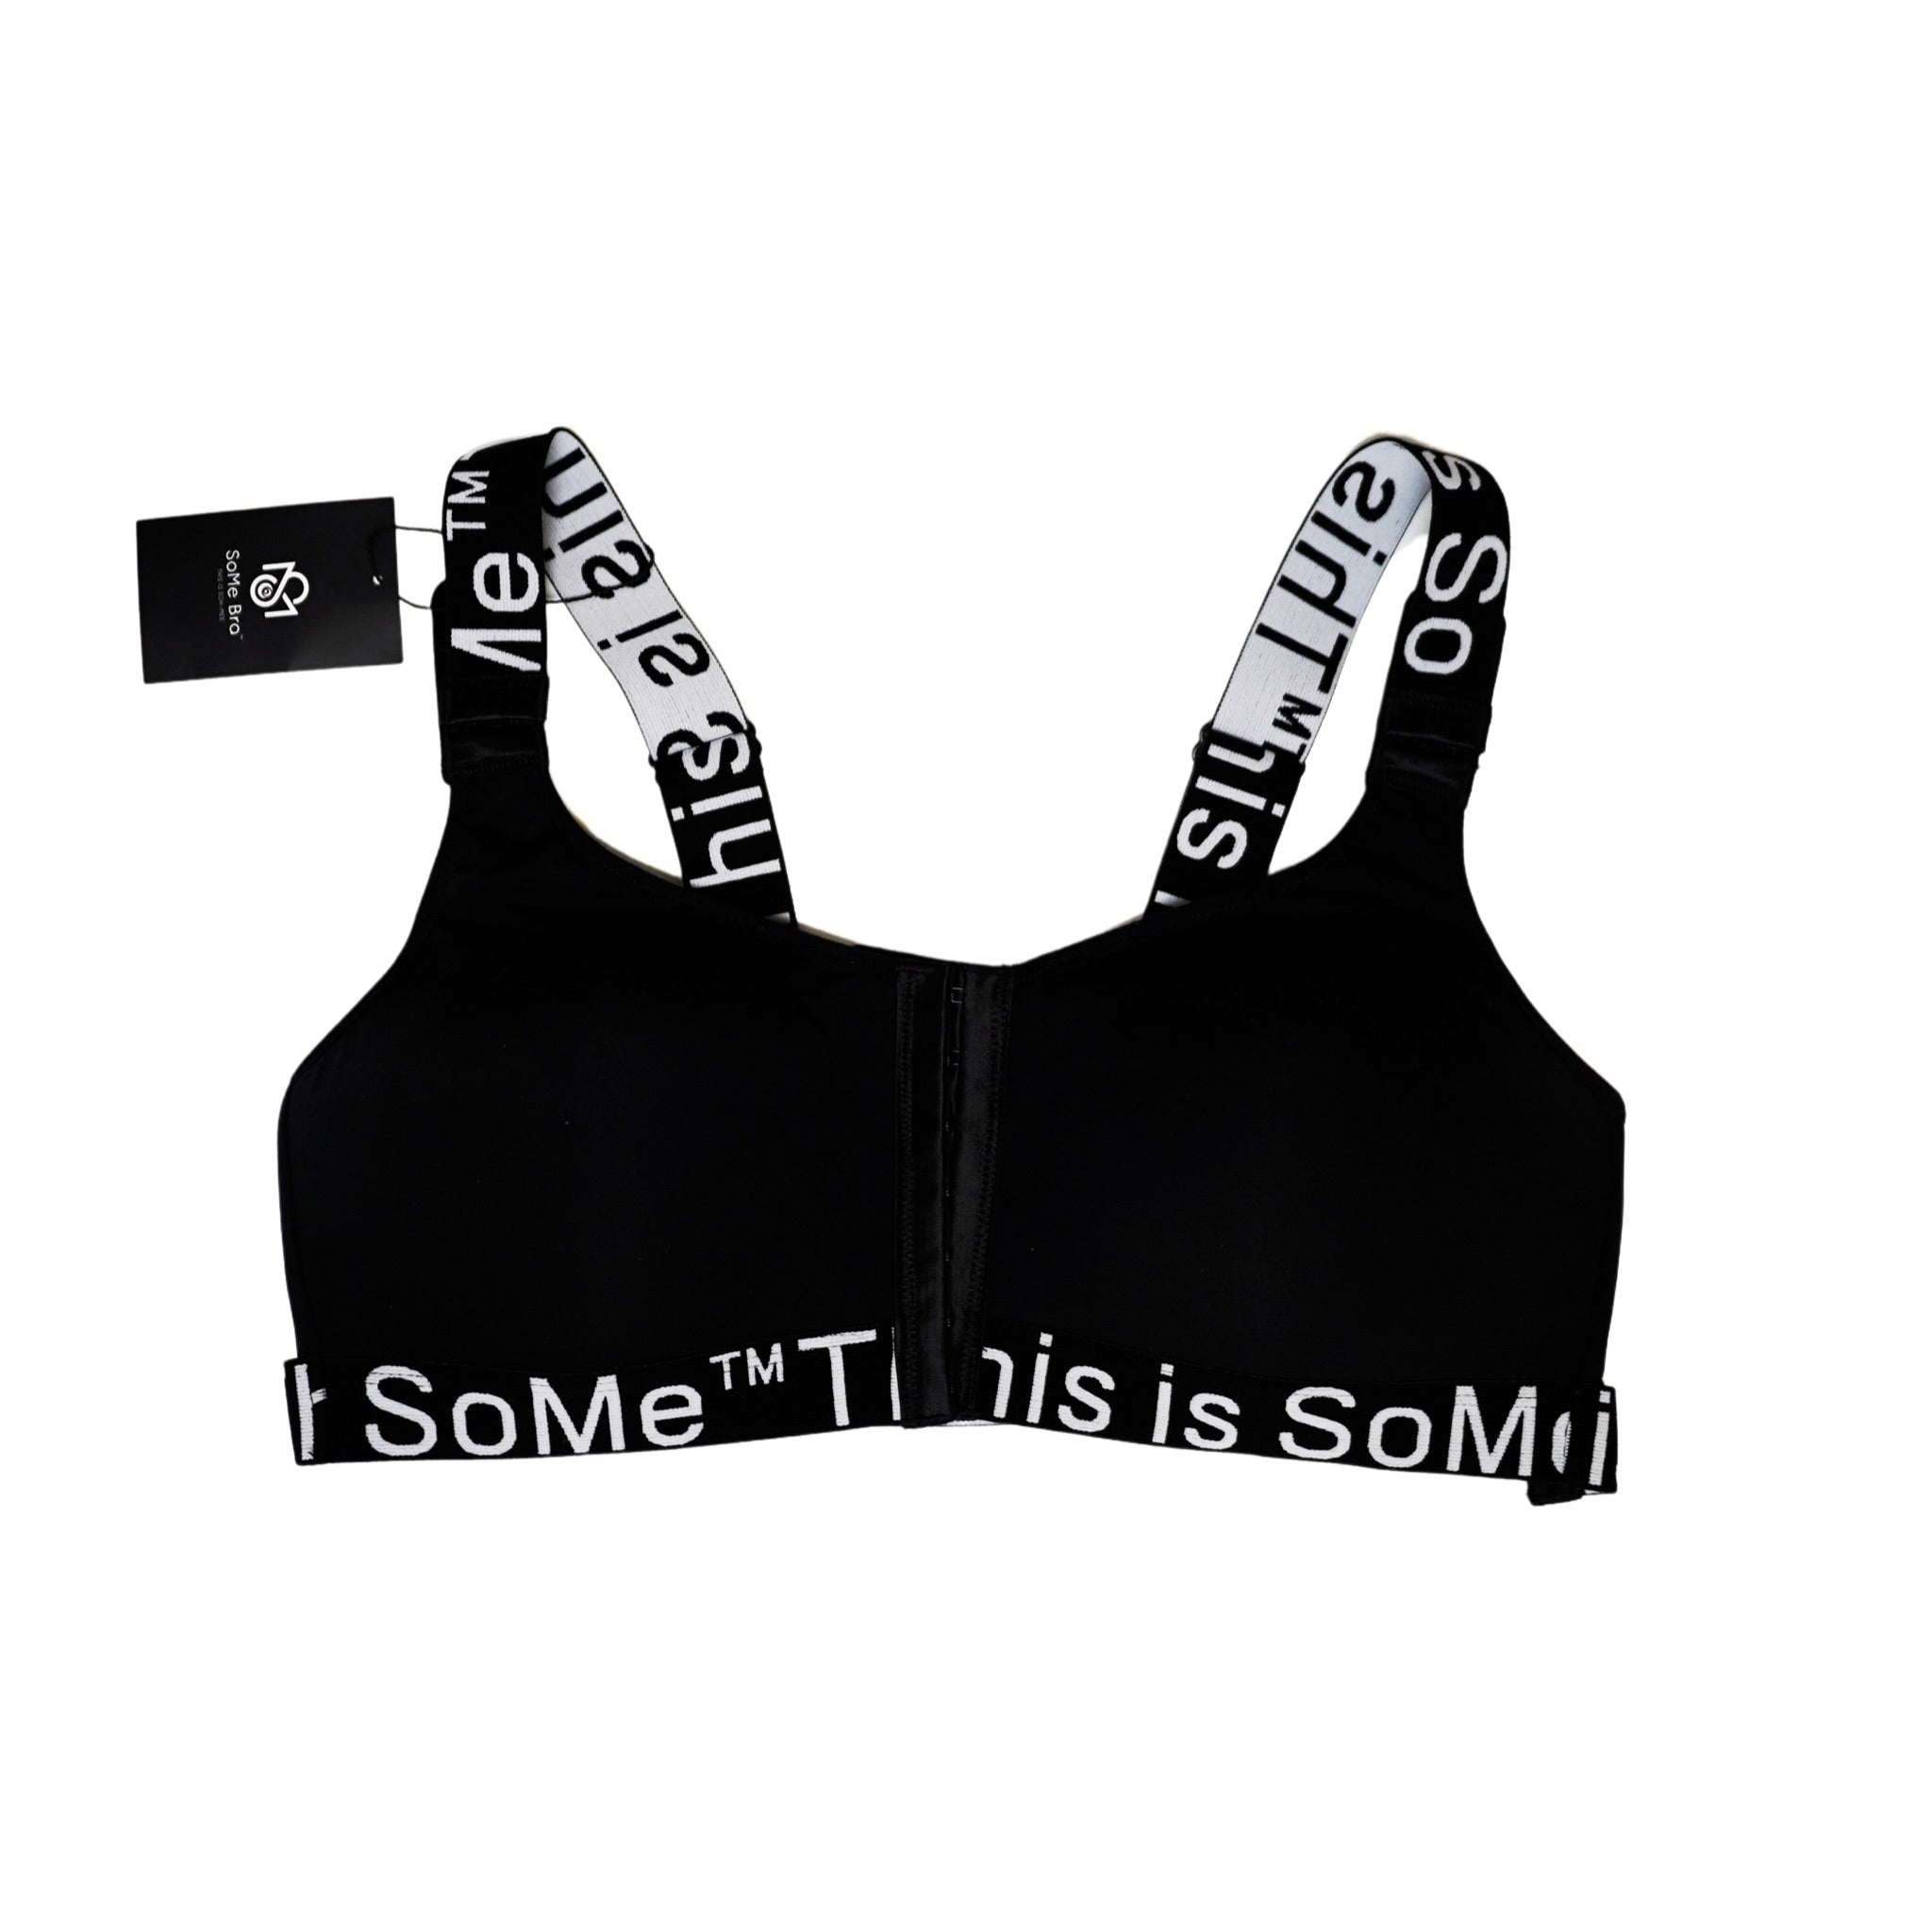 Replying to @user6135870136269 my fav sports bra of all time